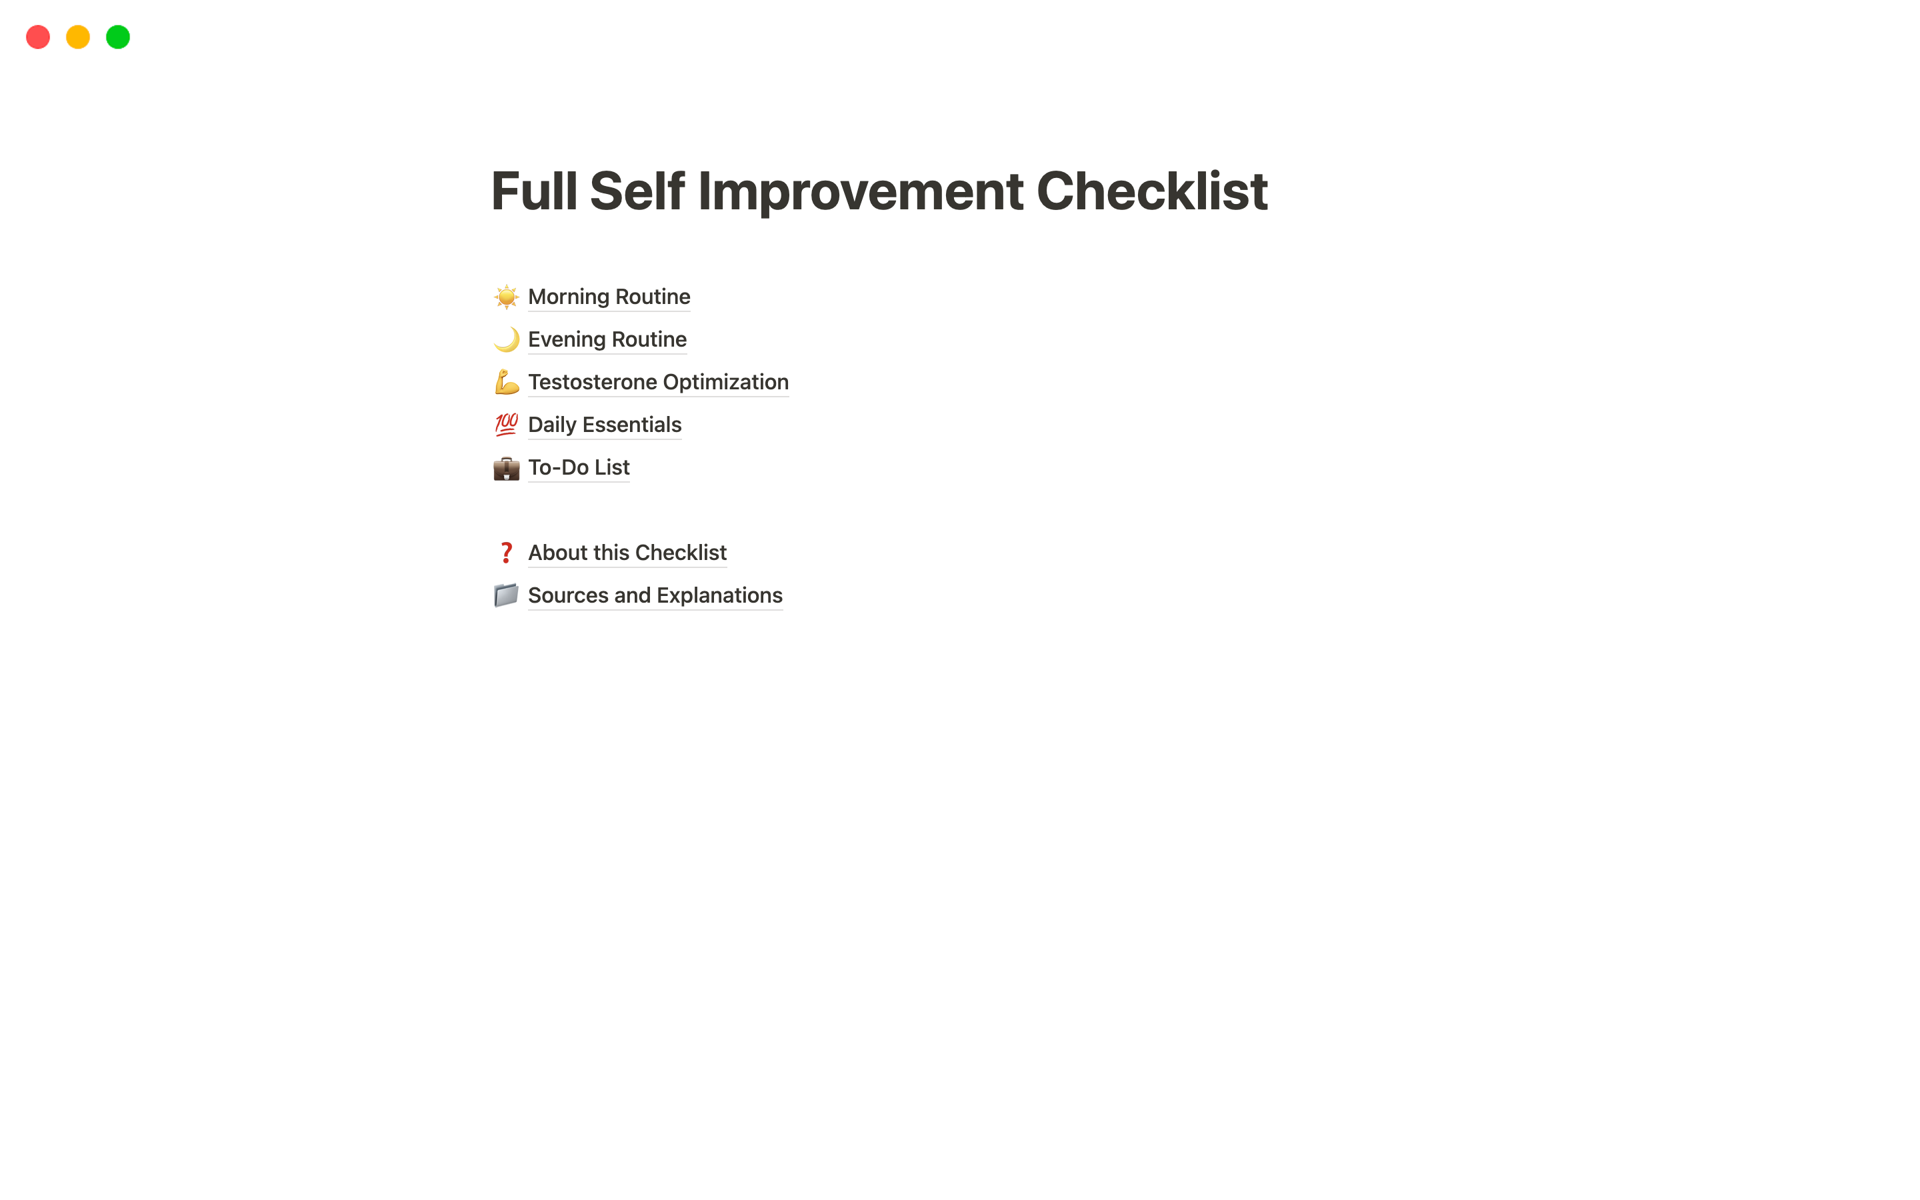 Full Self-Improvement Checklist for your convenience